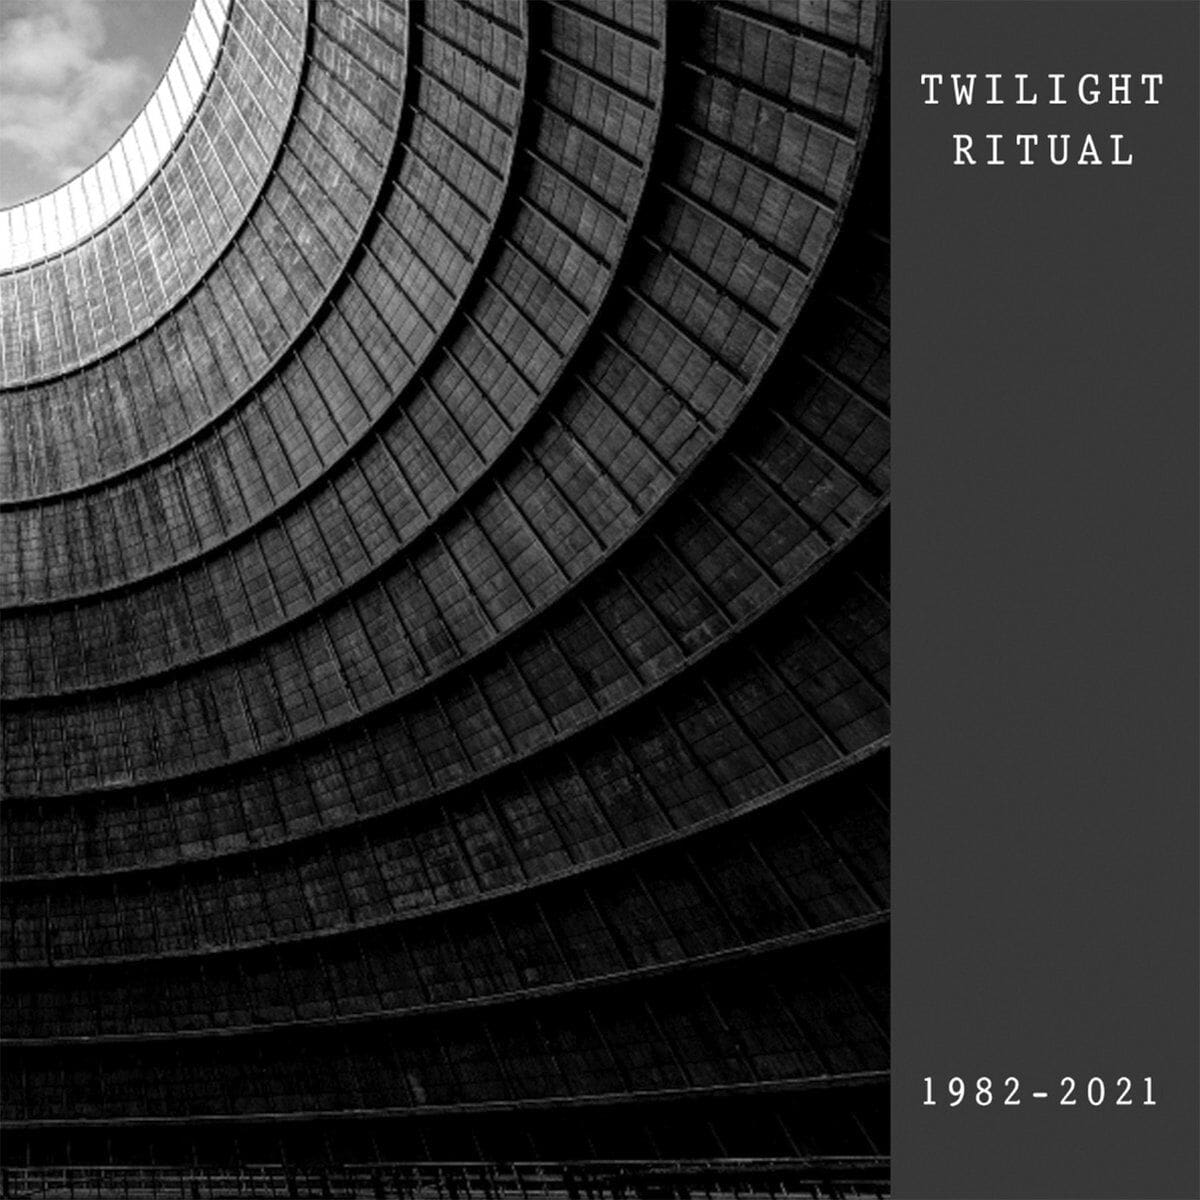 Belgian cult darkwave act Twilight Ritual compiled on '1982-2021', out on Wave Records